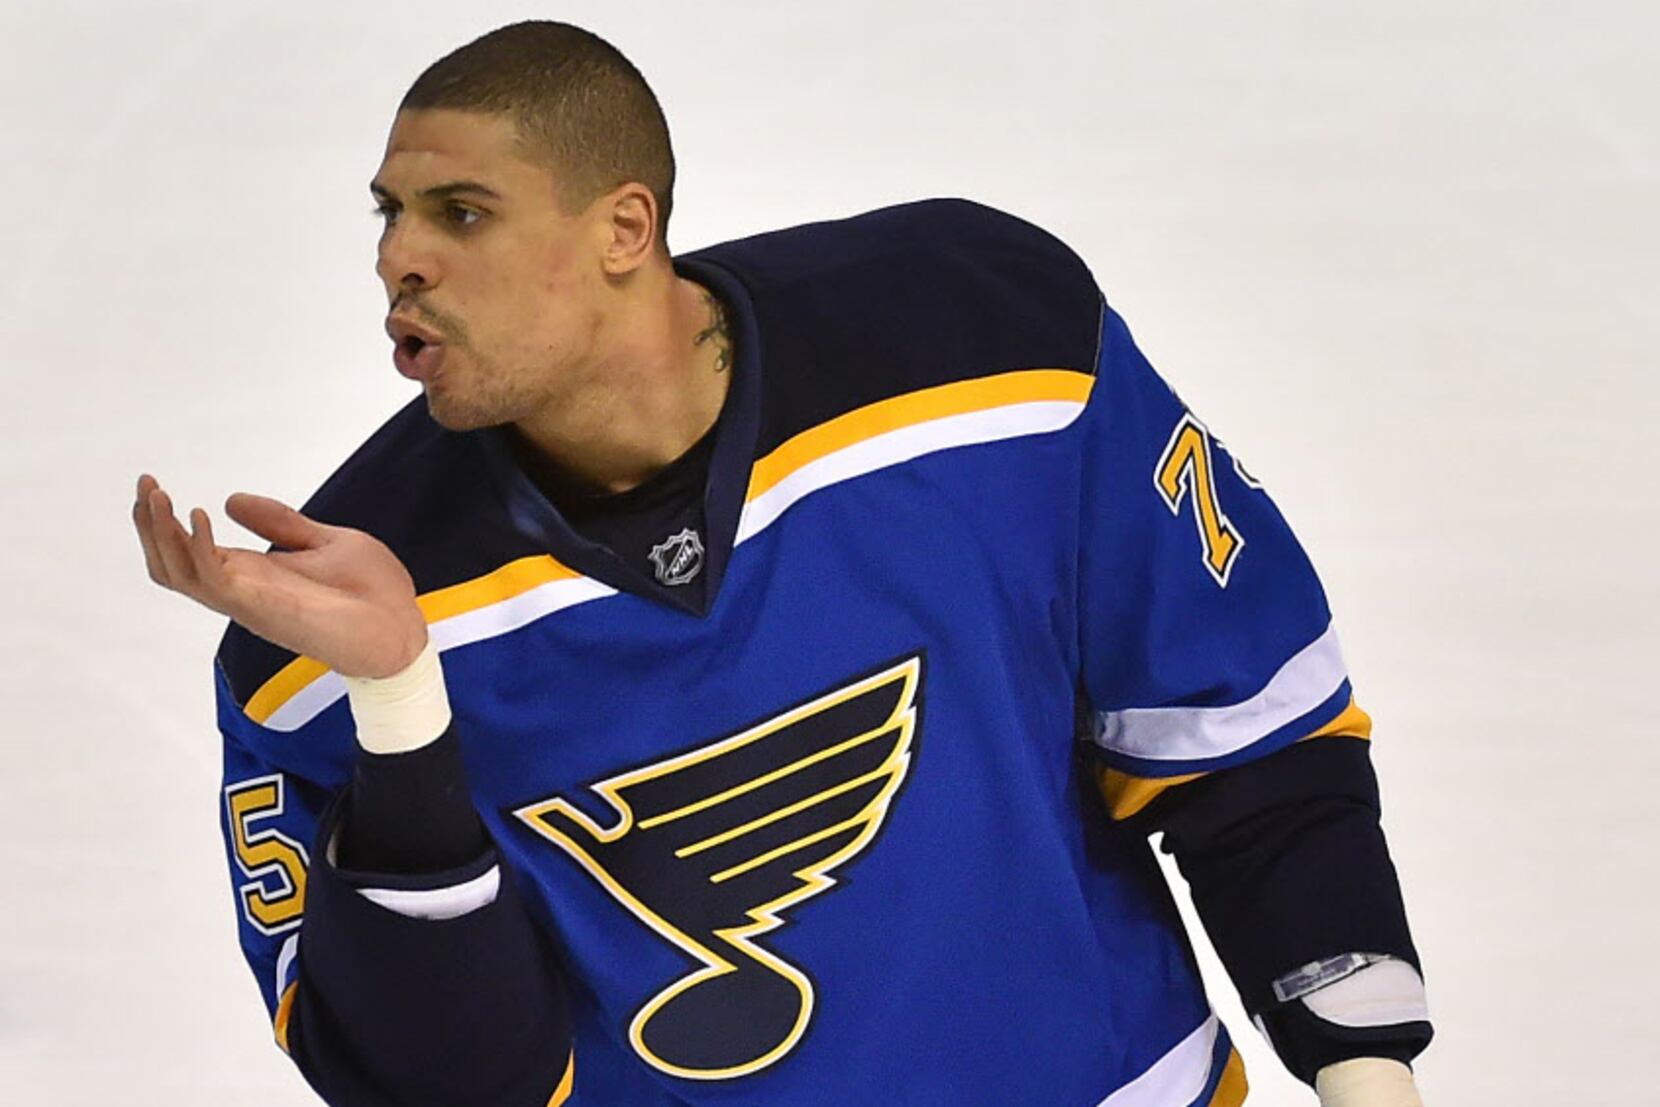 St. Louis Blues right wing Ryan Reaves (75) during the NHL game